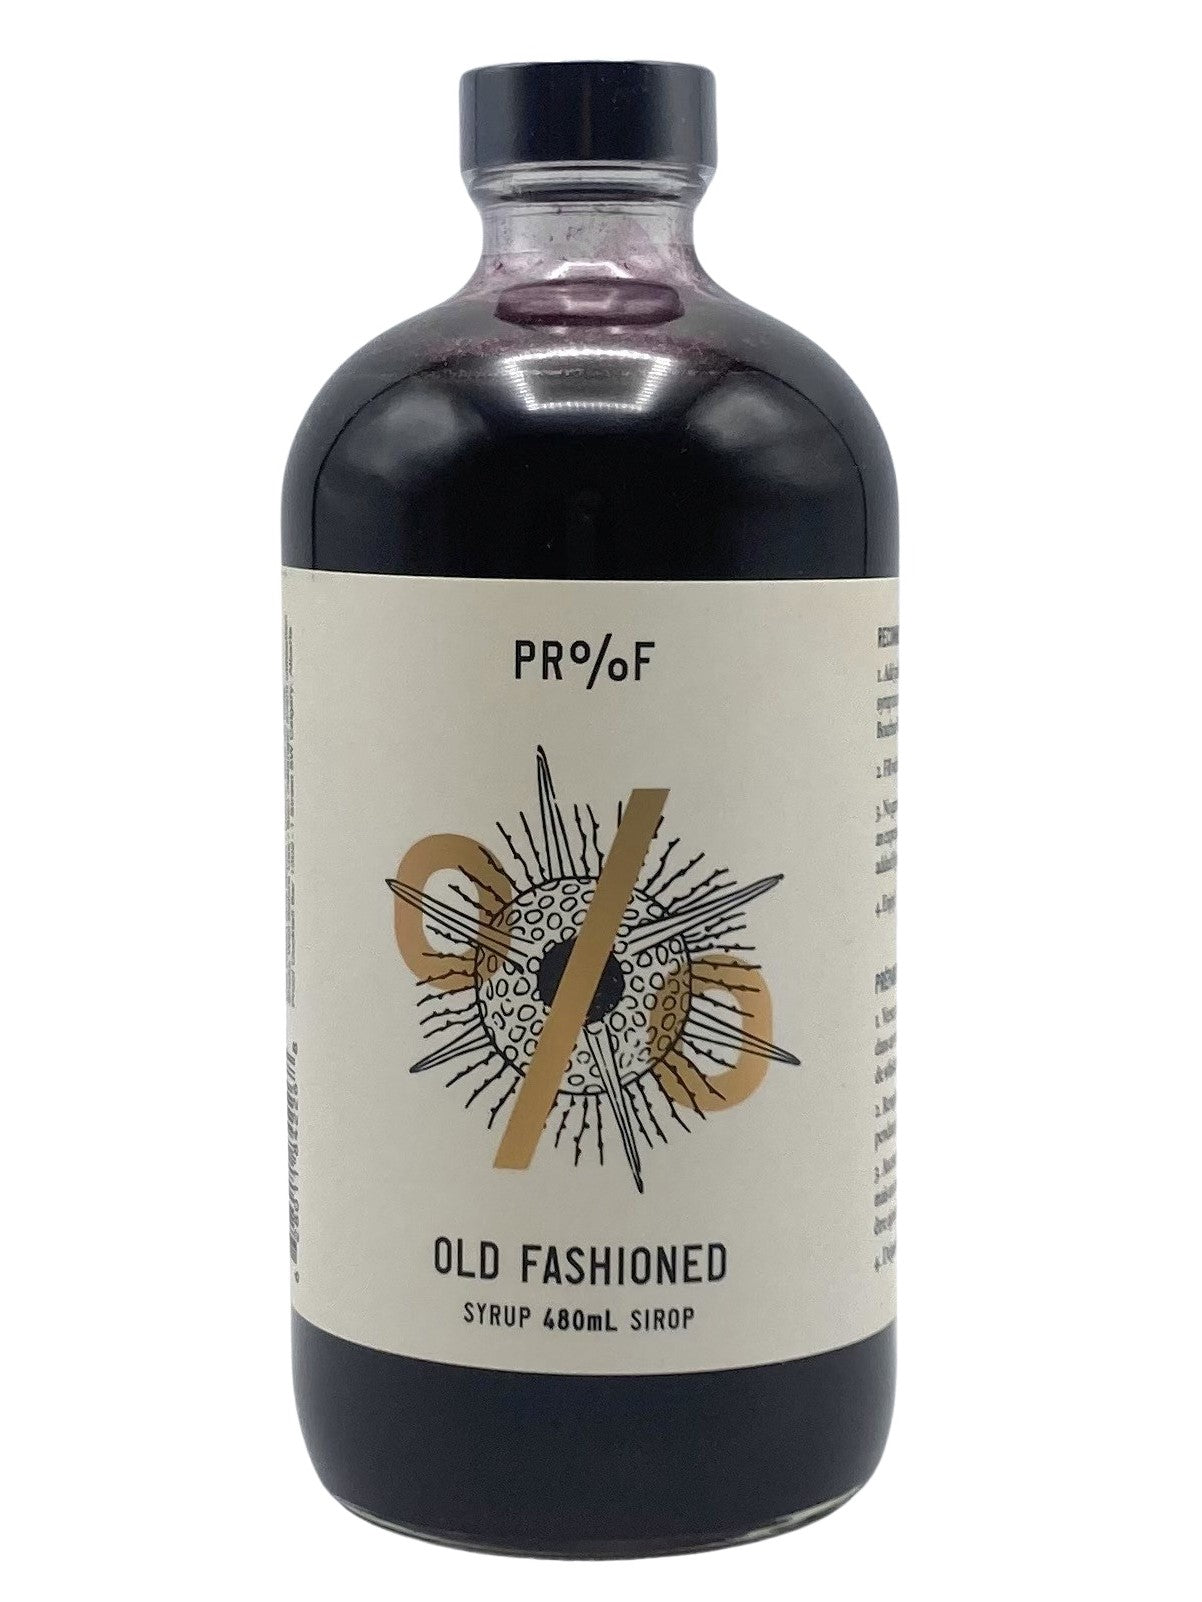 Proof Old Fashioned Syrup